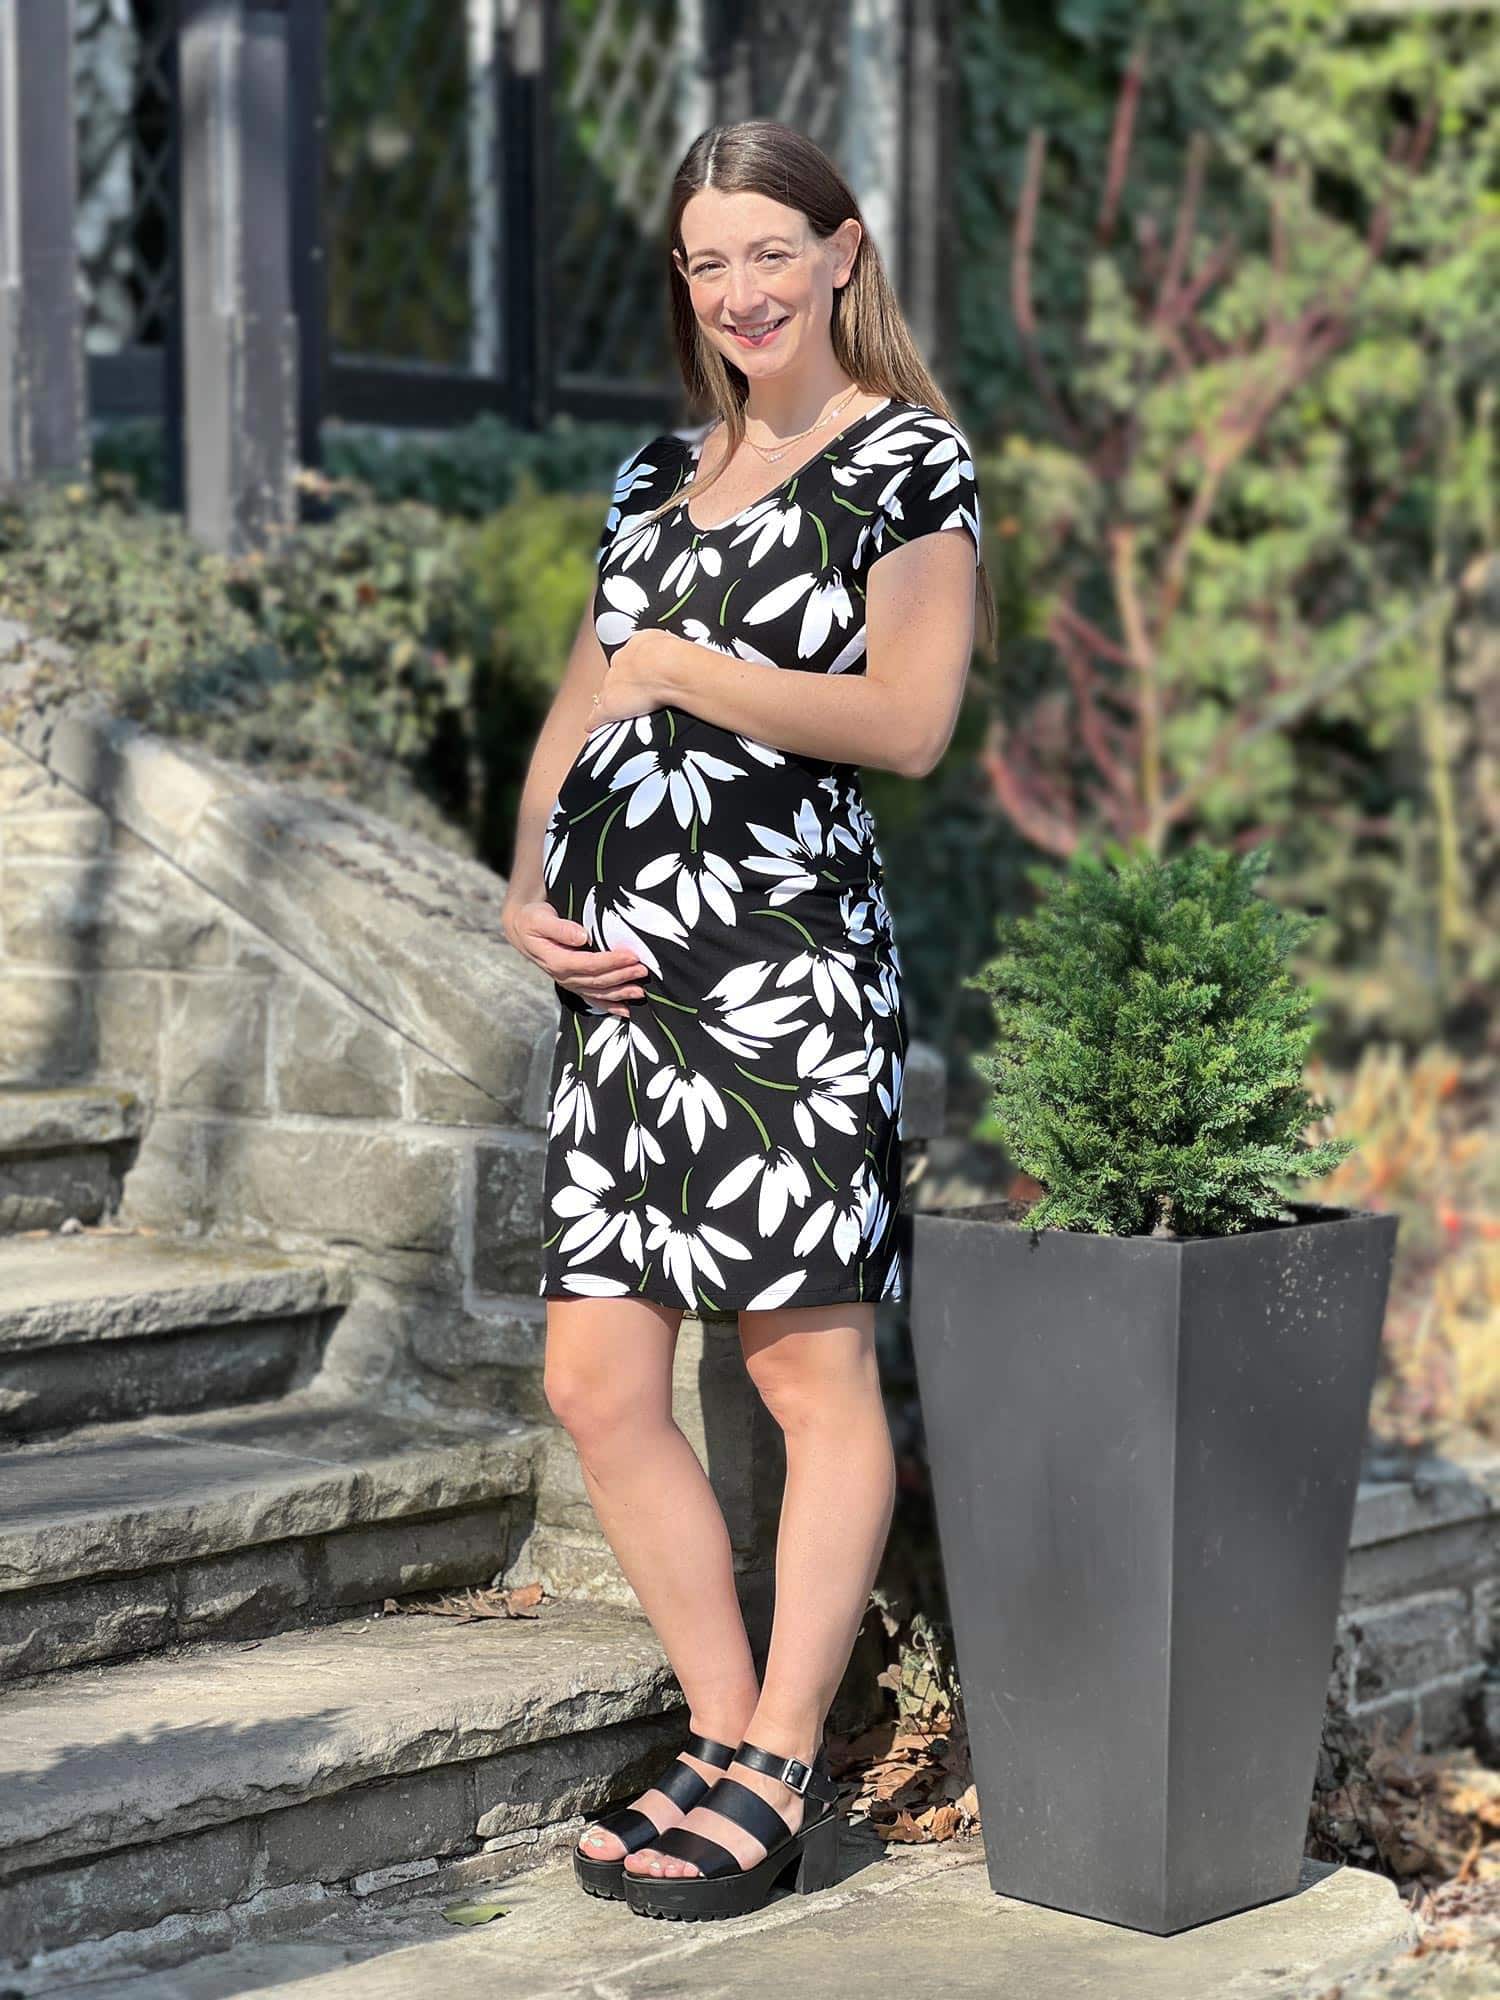 Pregnant woman standing wearing Miik's Sofia reversible everyday dress in floral print.